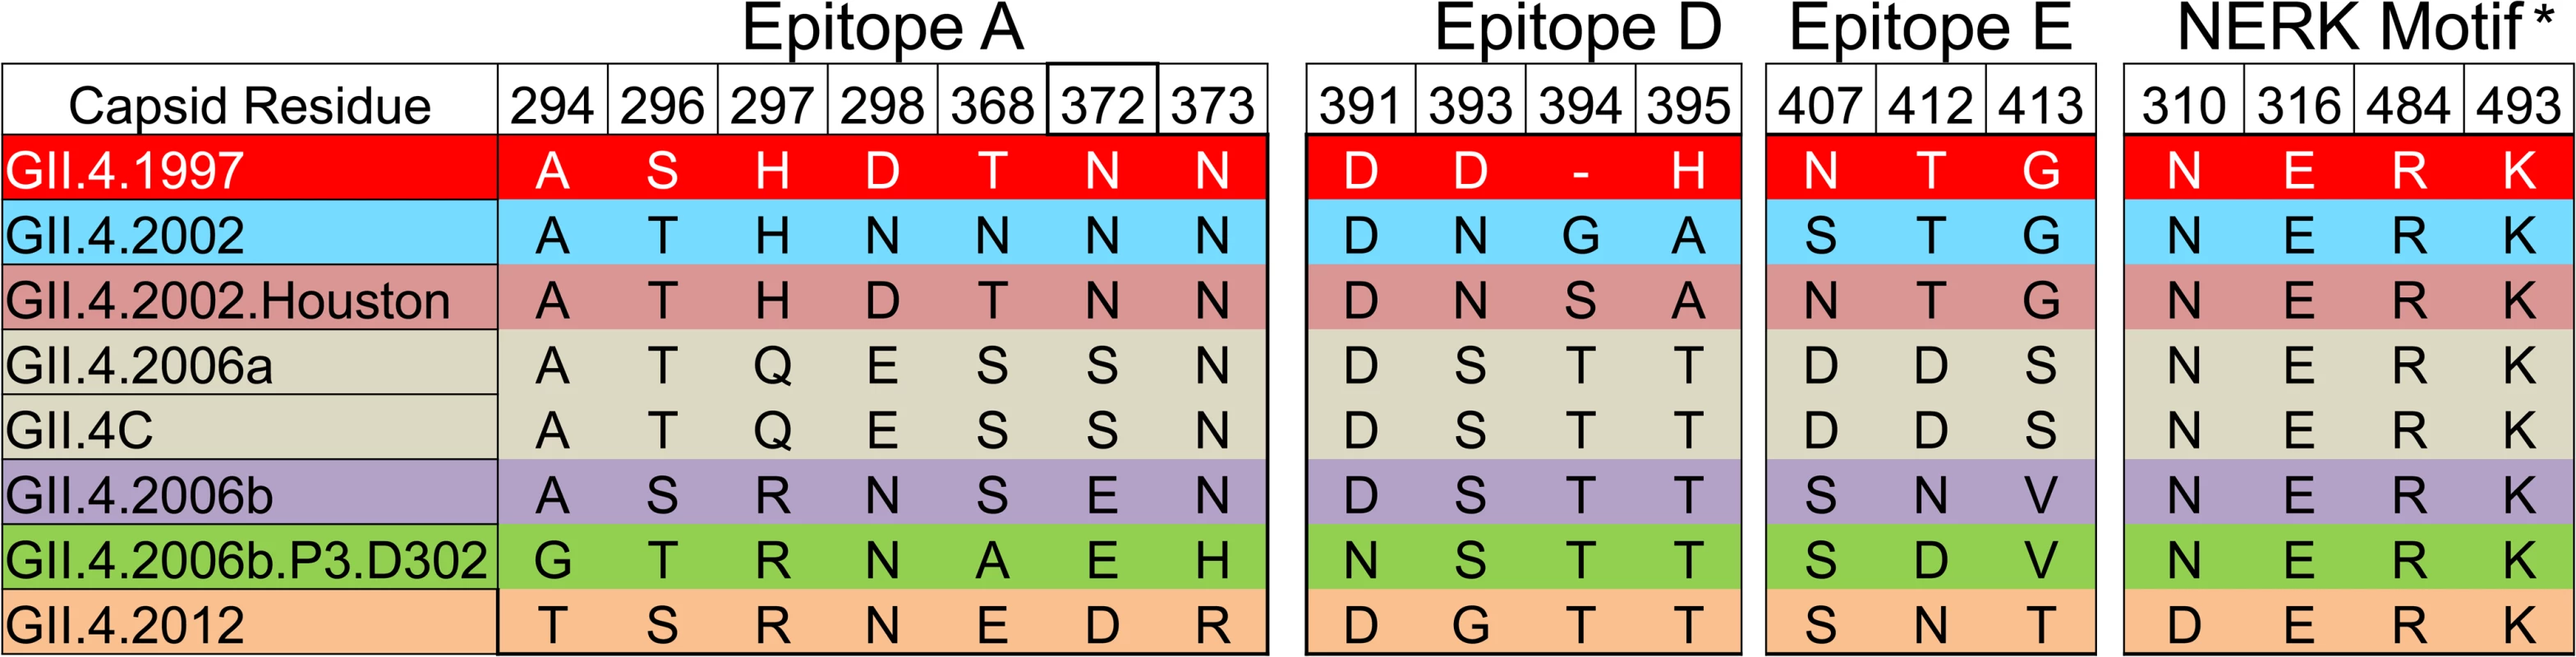 Amino acid sequence of identified GII.4 blockade antibody epitopes (A, D, and E) and the regulating domain of epitope F (NERK motif) in GII.4 virus-like particles relevant to this study.